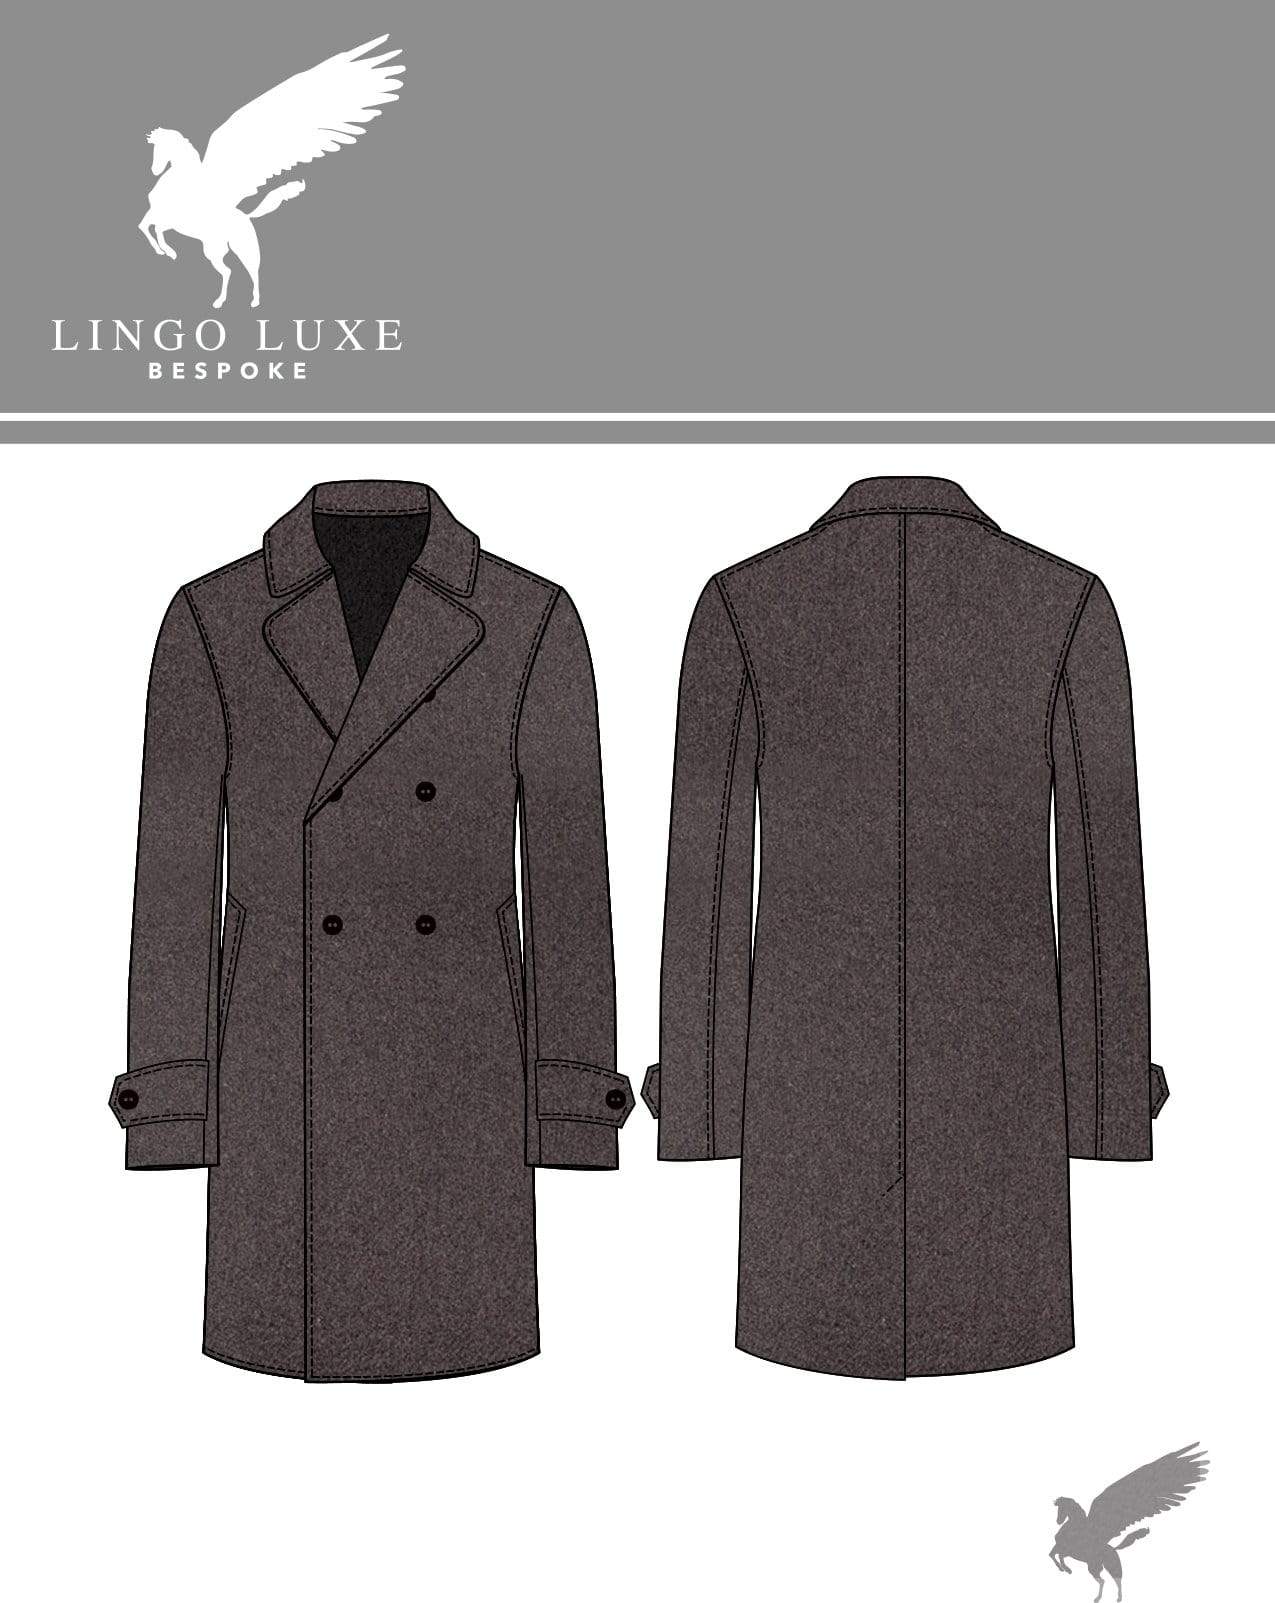 Outerwear | Lingo Luxe The Stately Overcoat | Espresso-Lingo Luxe Bespoke